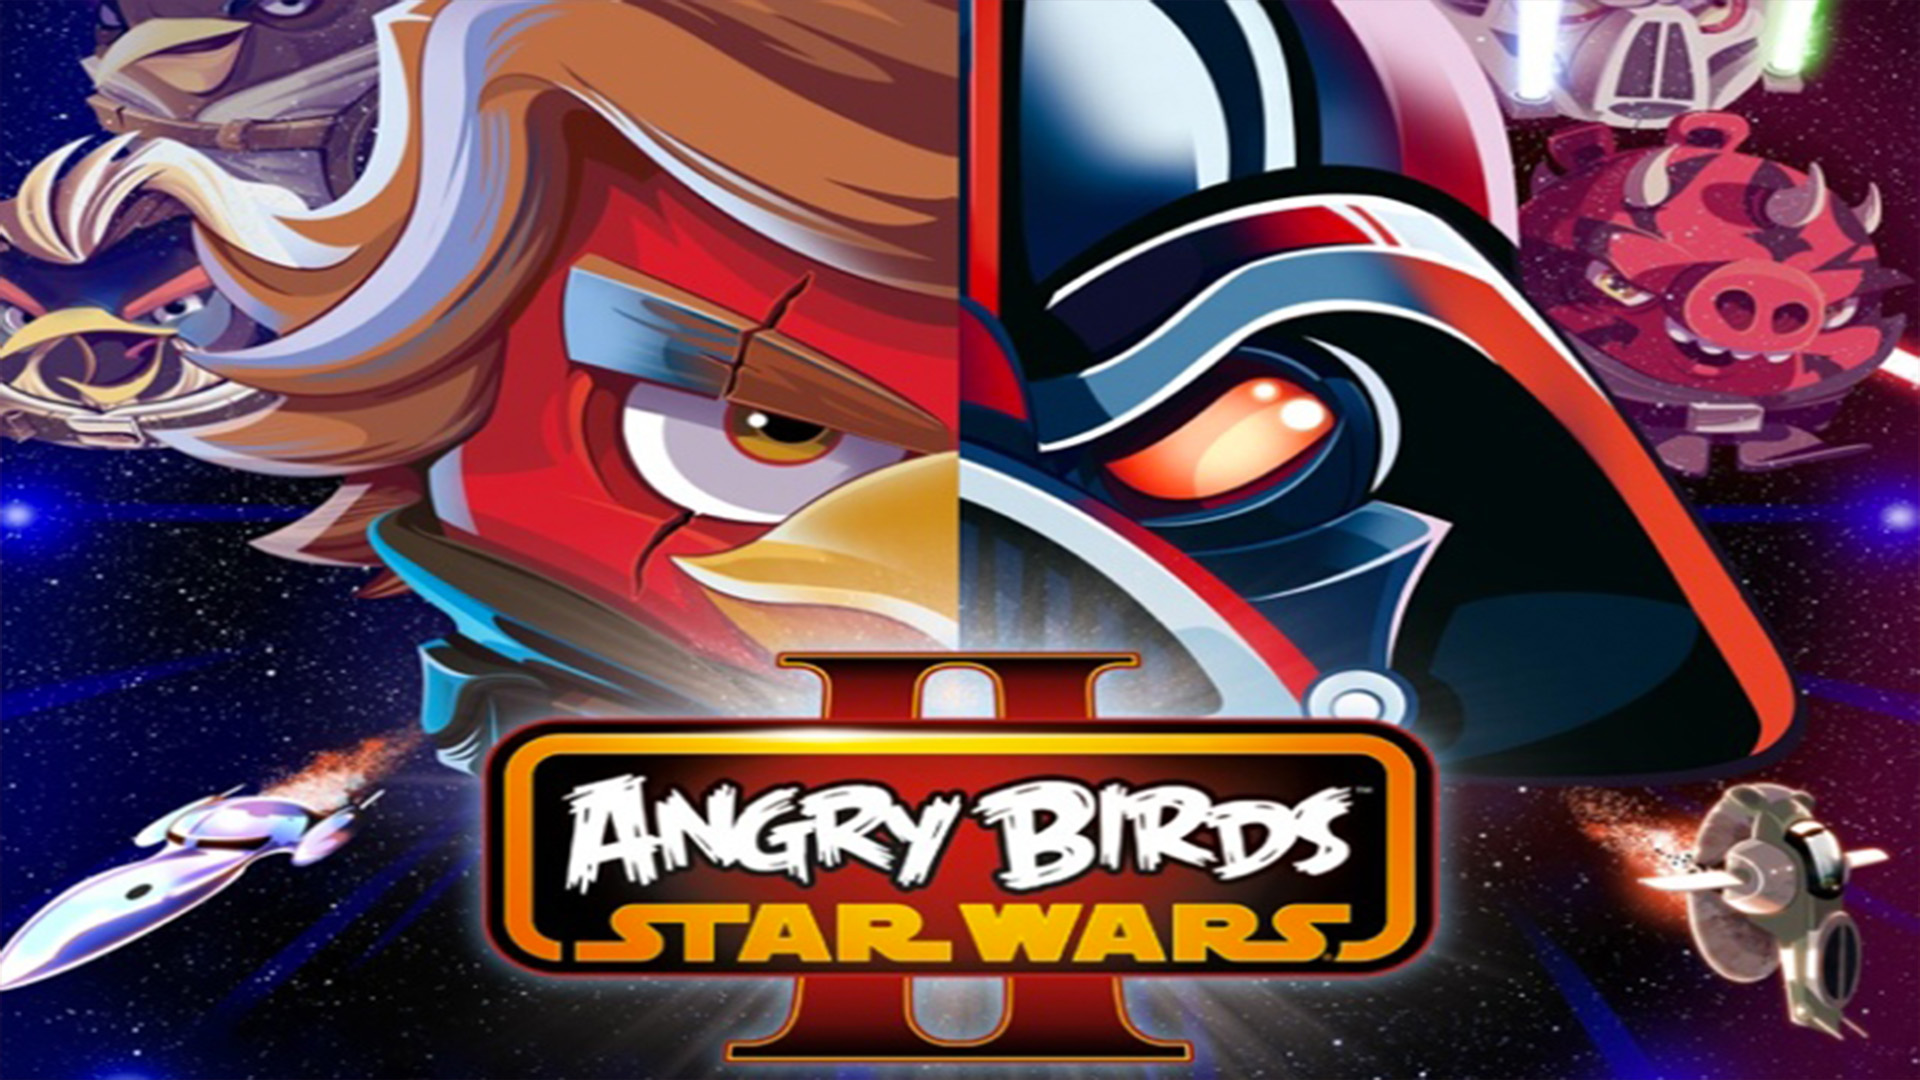 Angry Birds: Star Wars 2 HD Wallpapers and Backgrounds. 